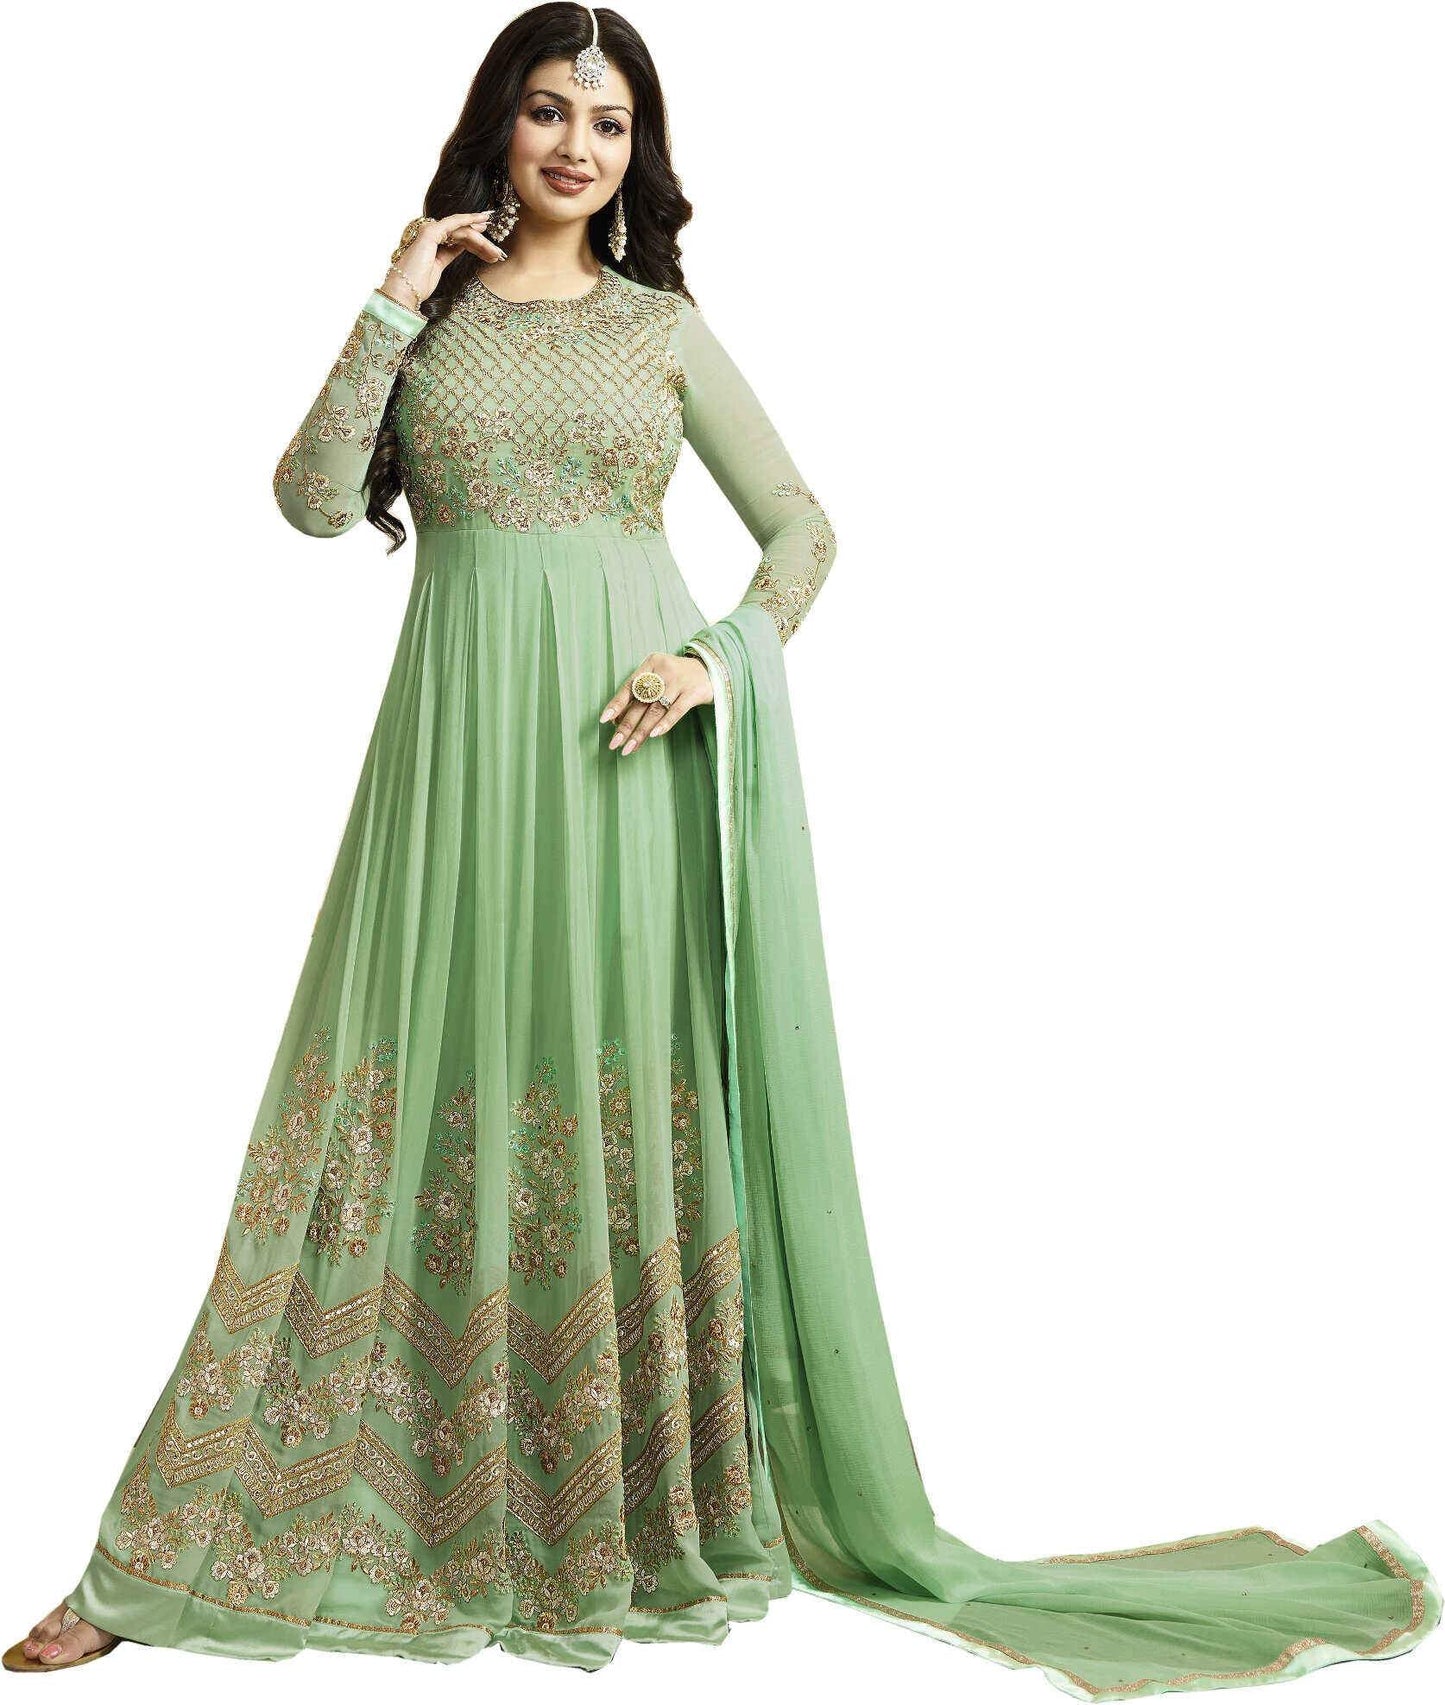 Sea Green with Golden Floral Embroidery Anarkali Suit-LKEDM-131